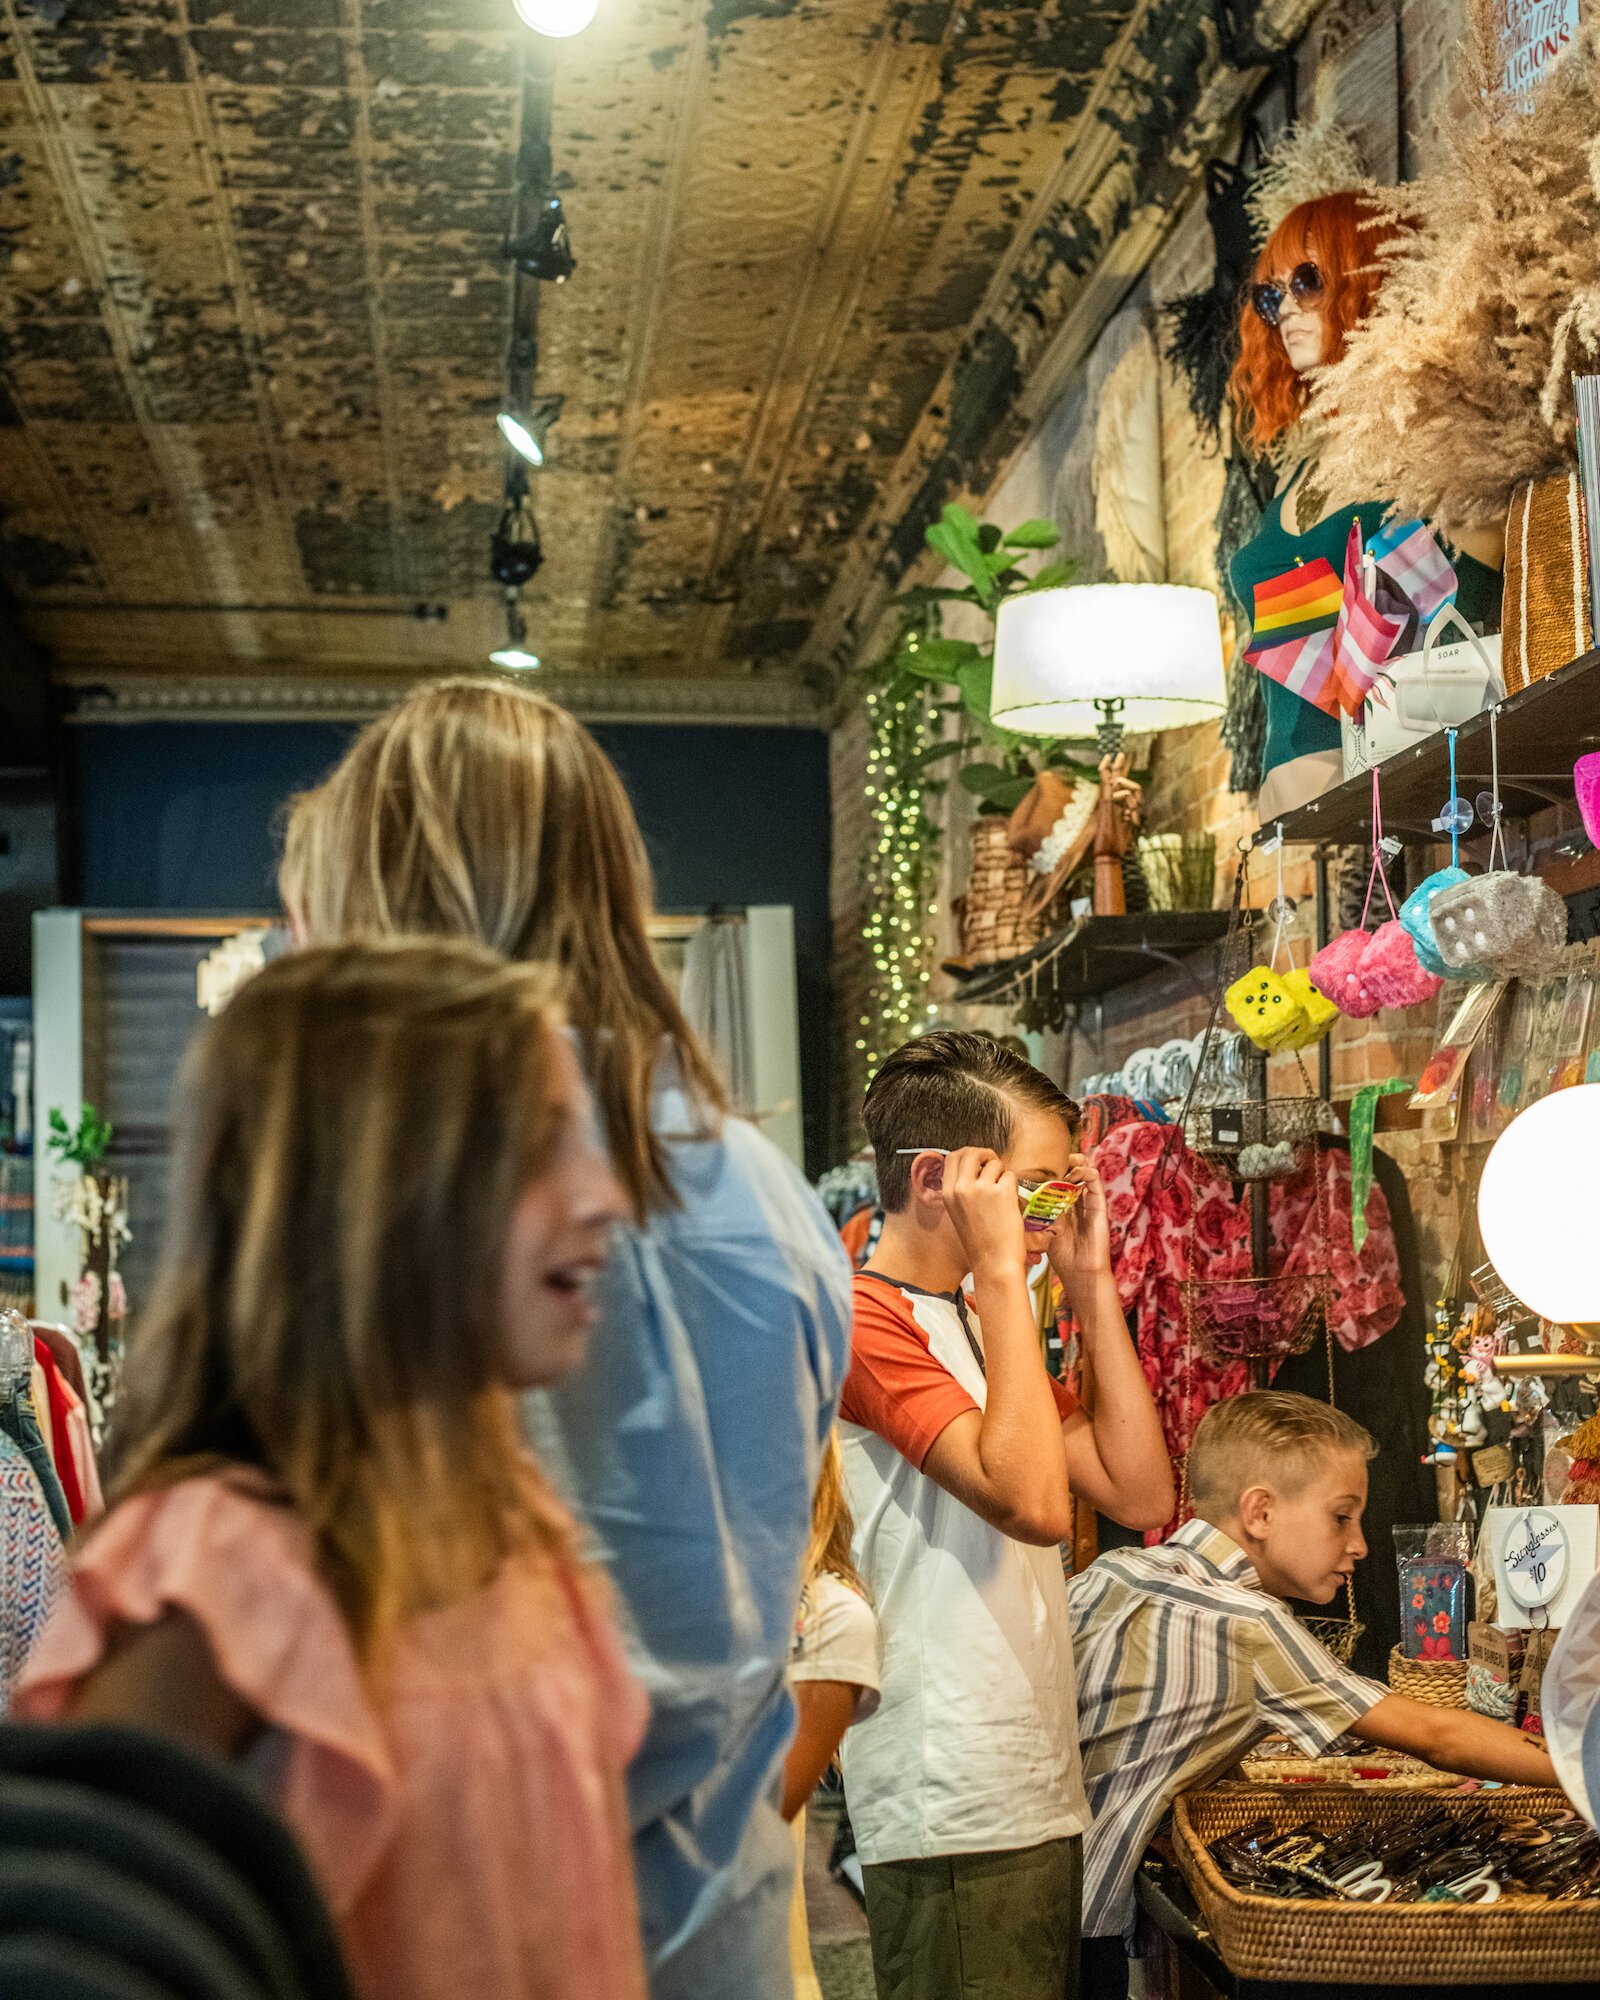 Wabash is home to many local shops, which the Spring family say they enjoy visiting.